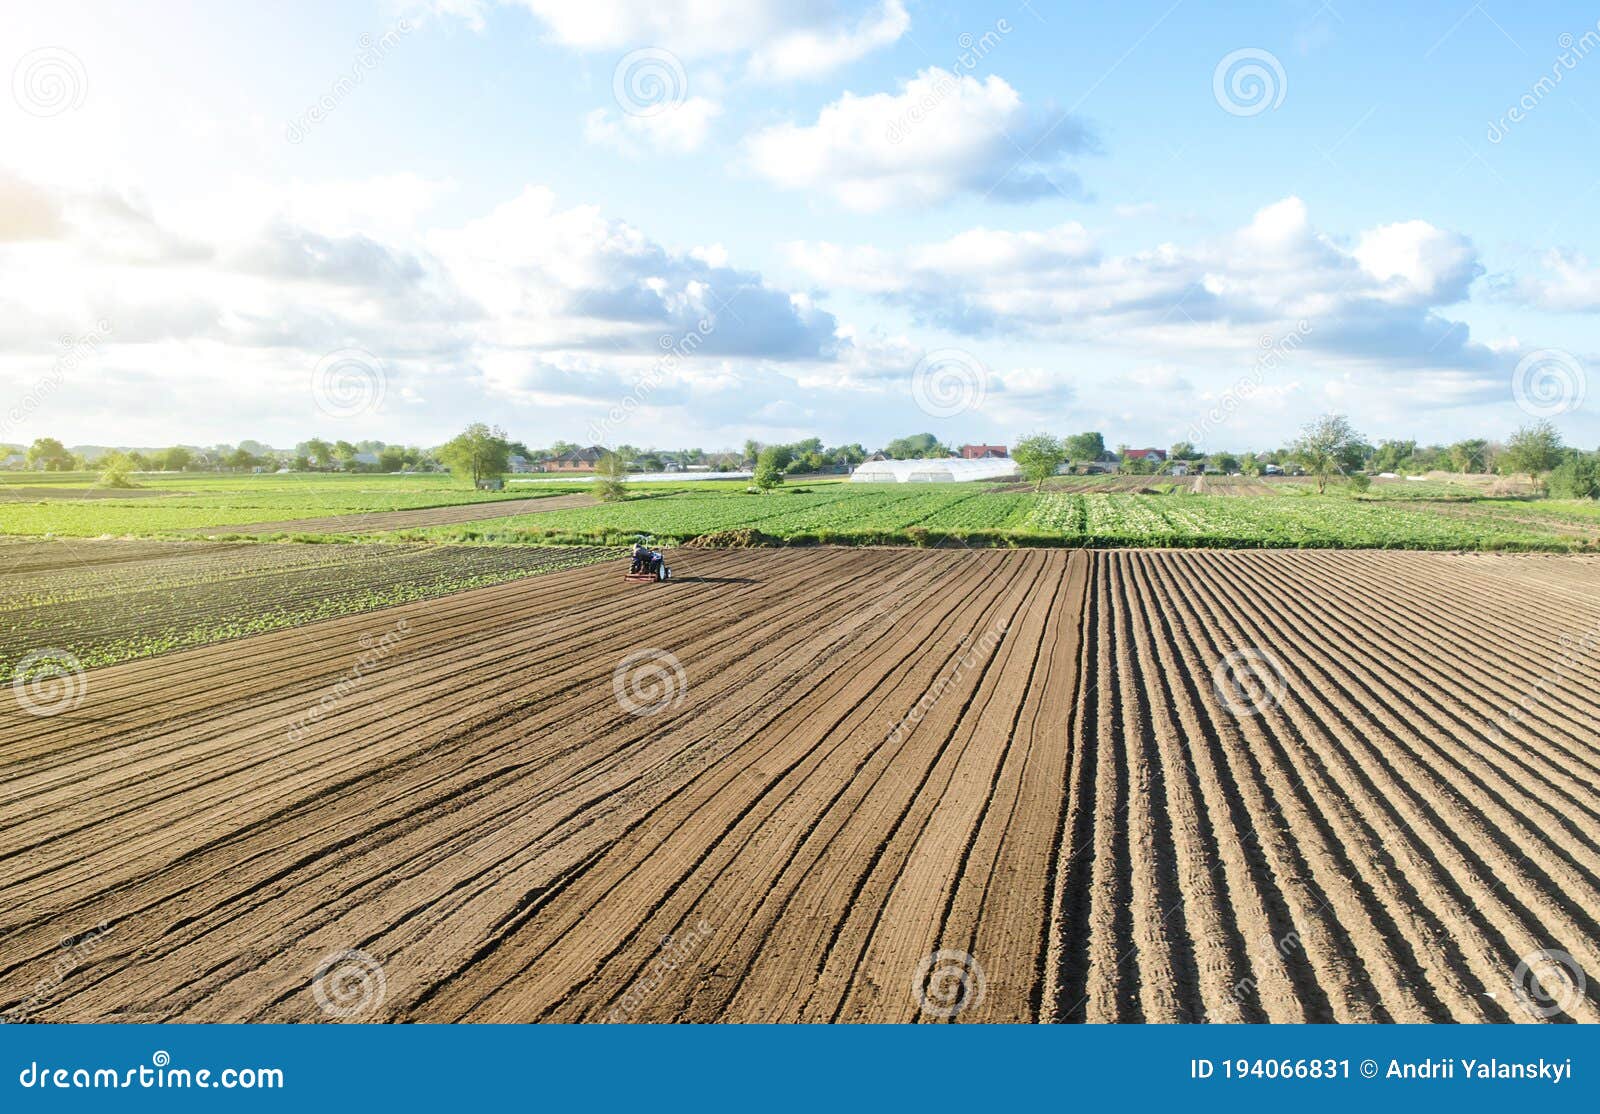 farmer on a tractor drives on a farm field. agriculture and agribusiness. growing vegetables. land market, lease of plots